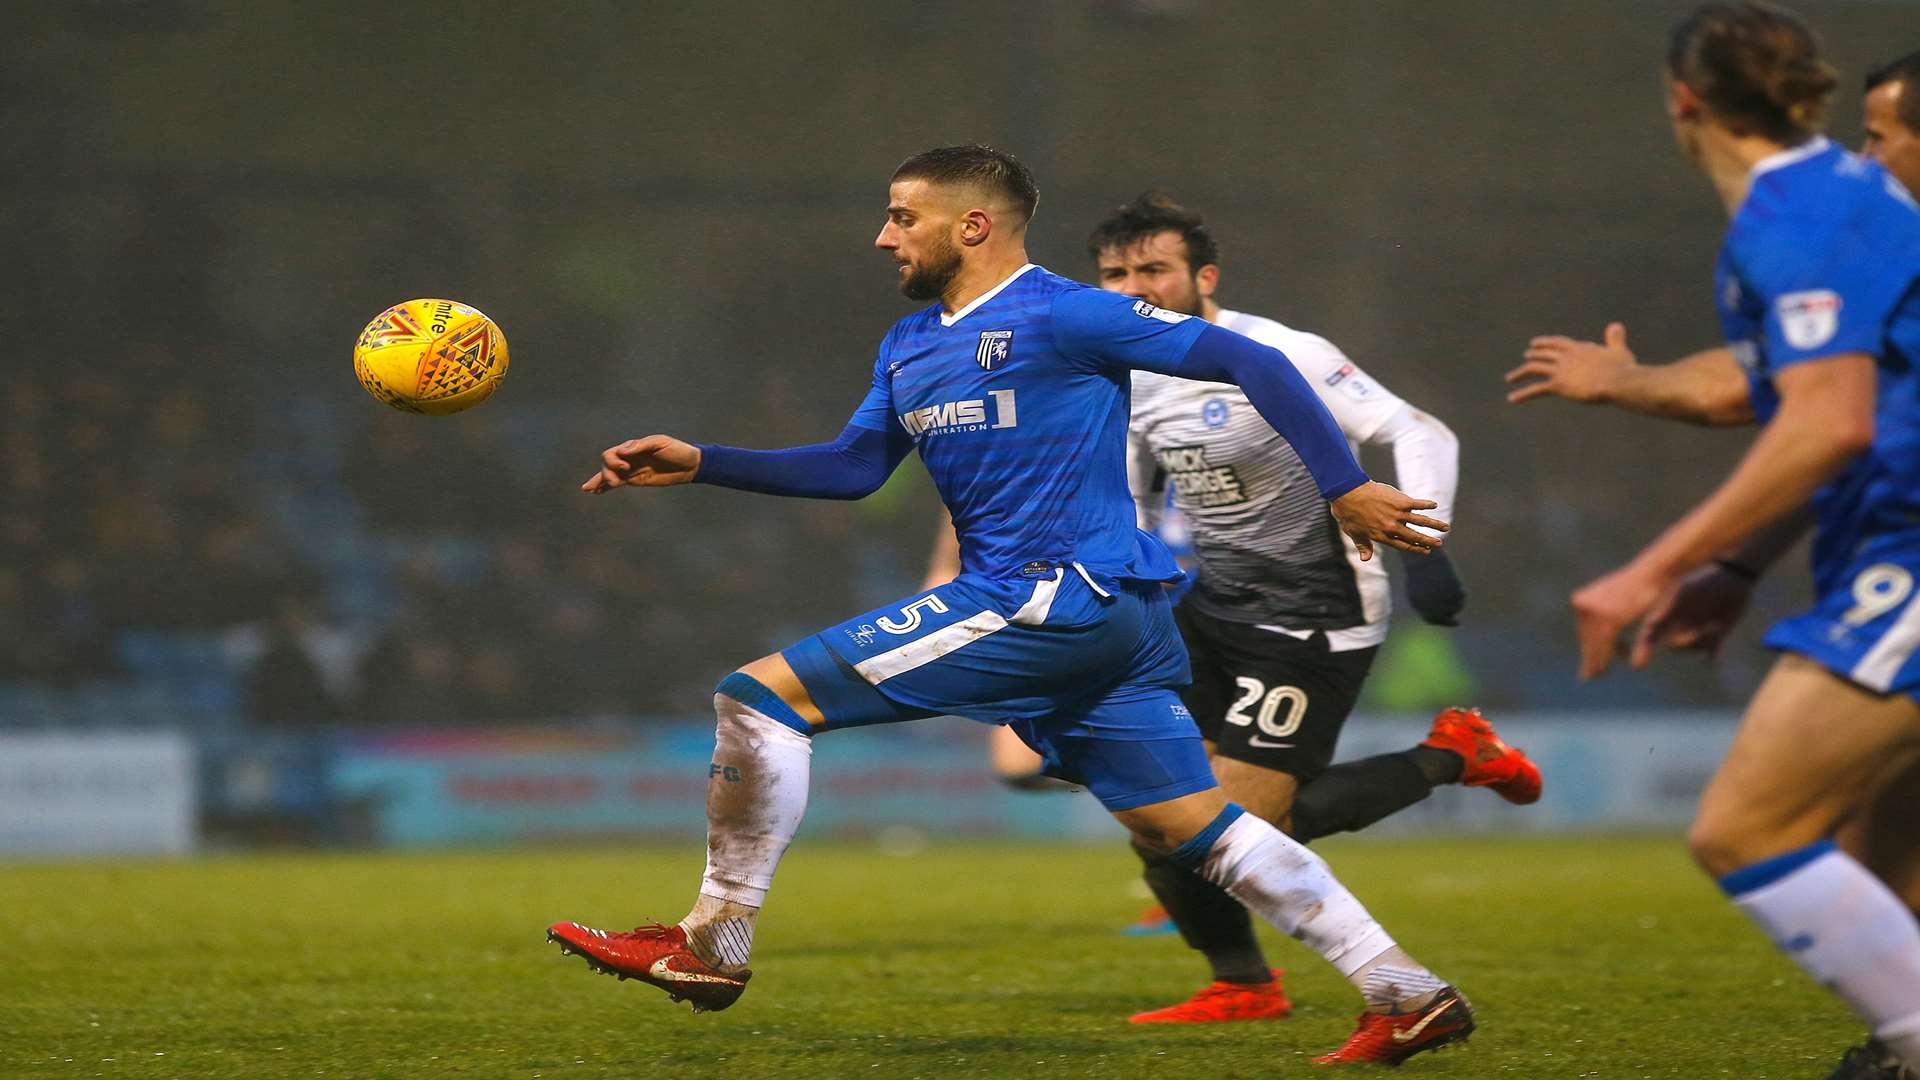 Gillingham defender Max Ehmer shapes up to fire in the equaliser. Picture: Andy Jones